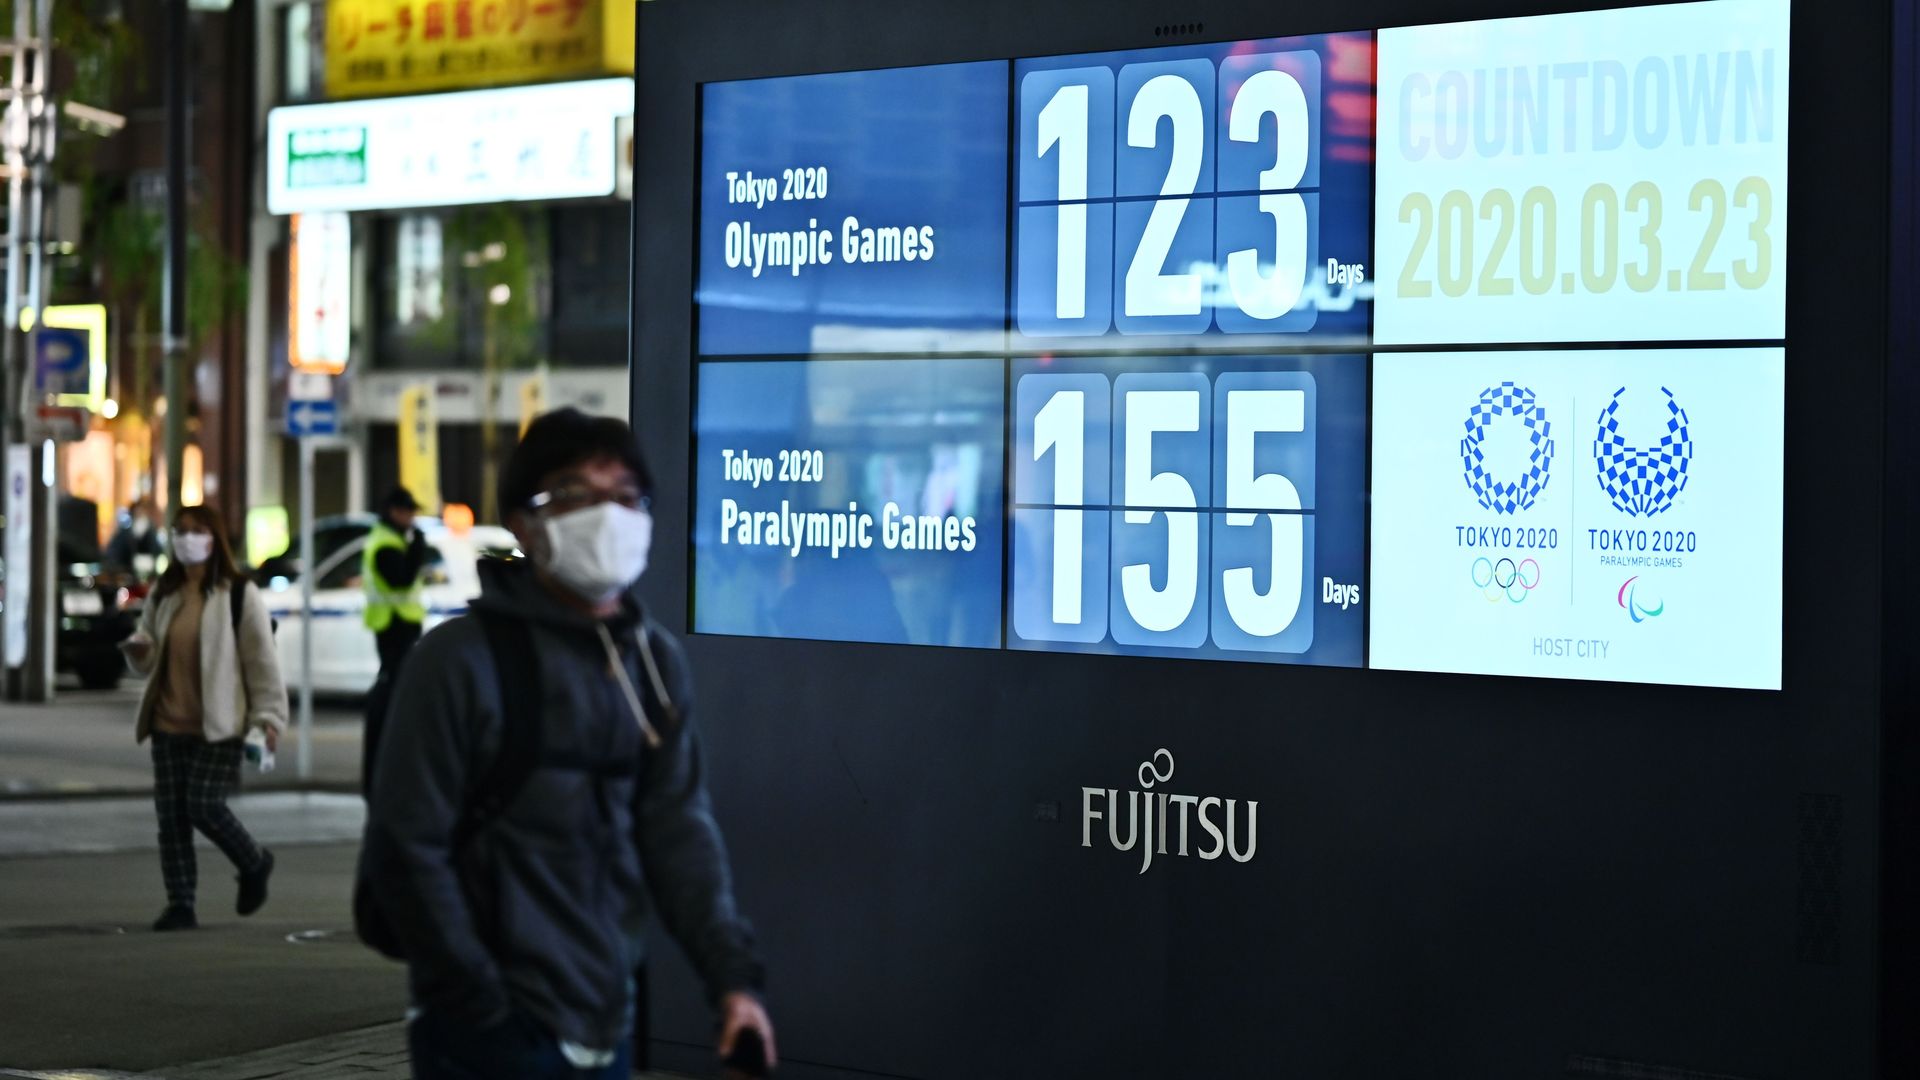 A man wearing a face mask, amid concerns of the COVID-19 coronavirus, walks past a display showing a countdown to the start of the Tokyo 2020 Olympic Games in Tokyo 